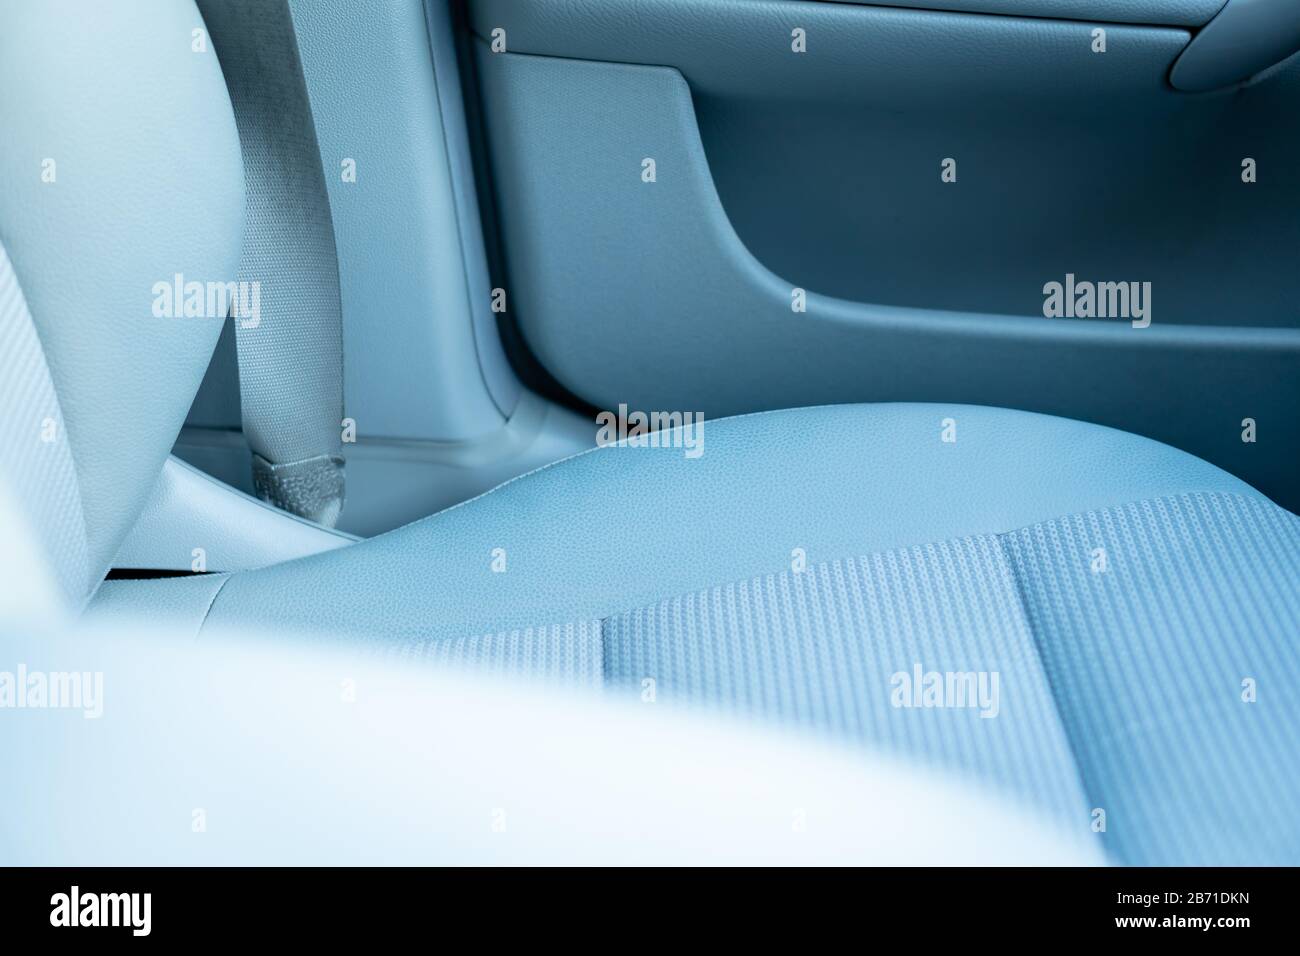 Leather interior design, car passenger and driver seats, clean, angle view side Stock Photo